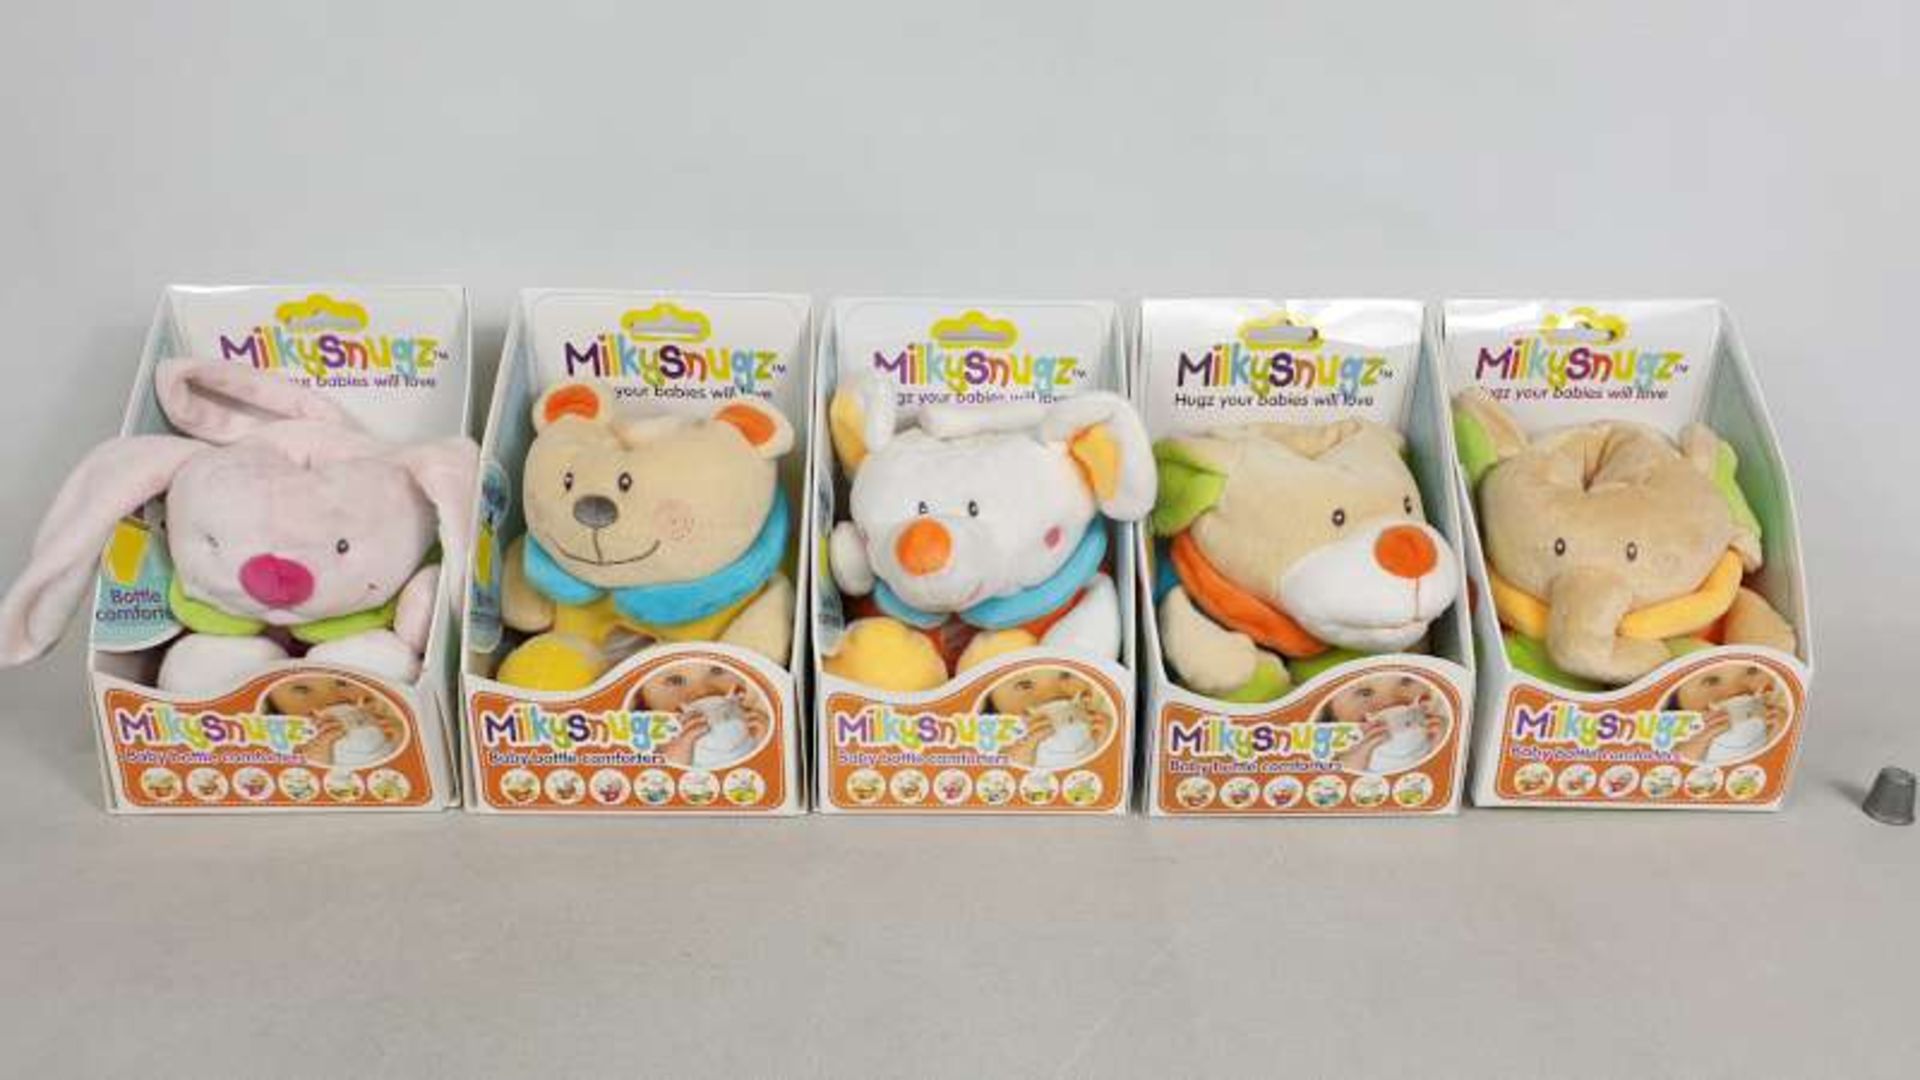 18 X BRAND NEW BOXED MILKYSNUGZ BABY BOTTLE COMFORTER INFANT SOOTHING CALMING TEDDIES MOUSE